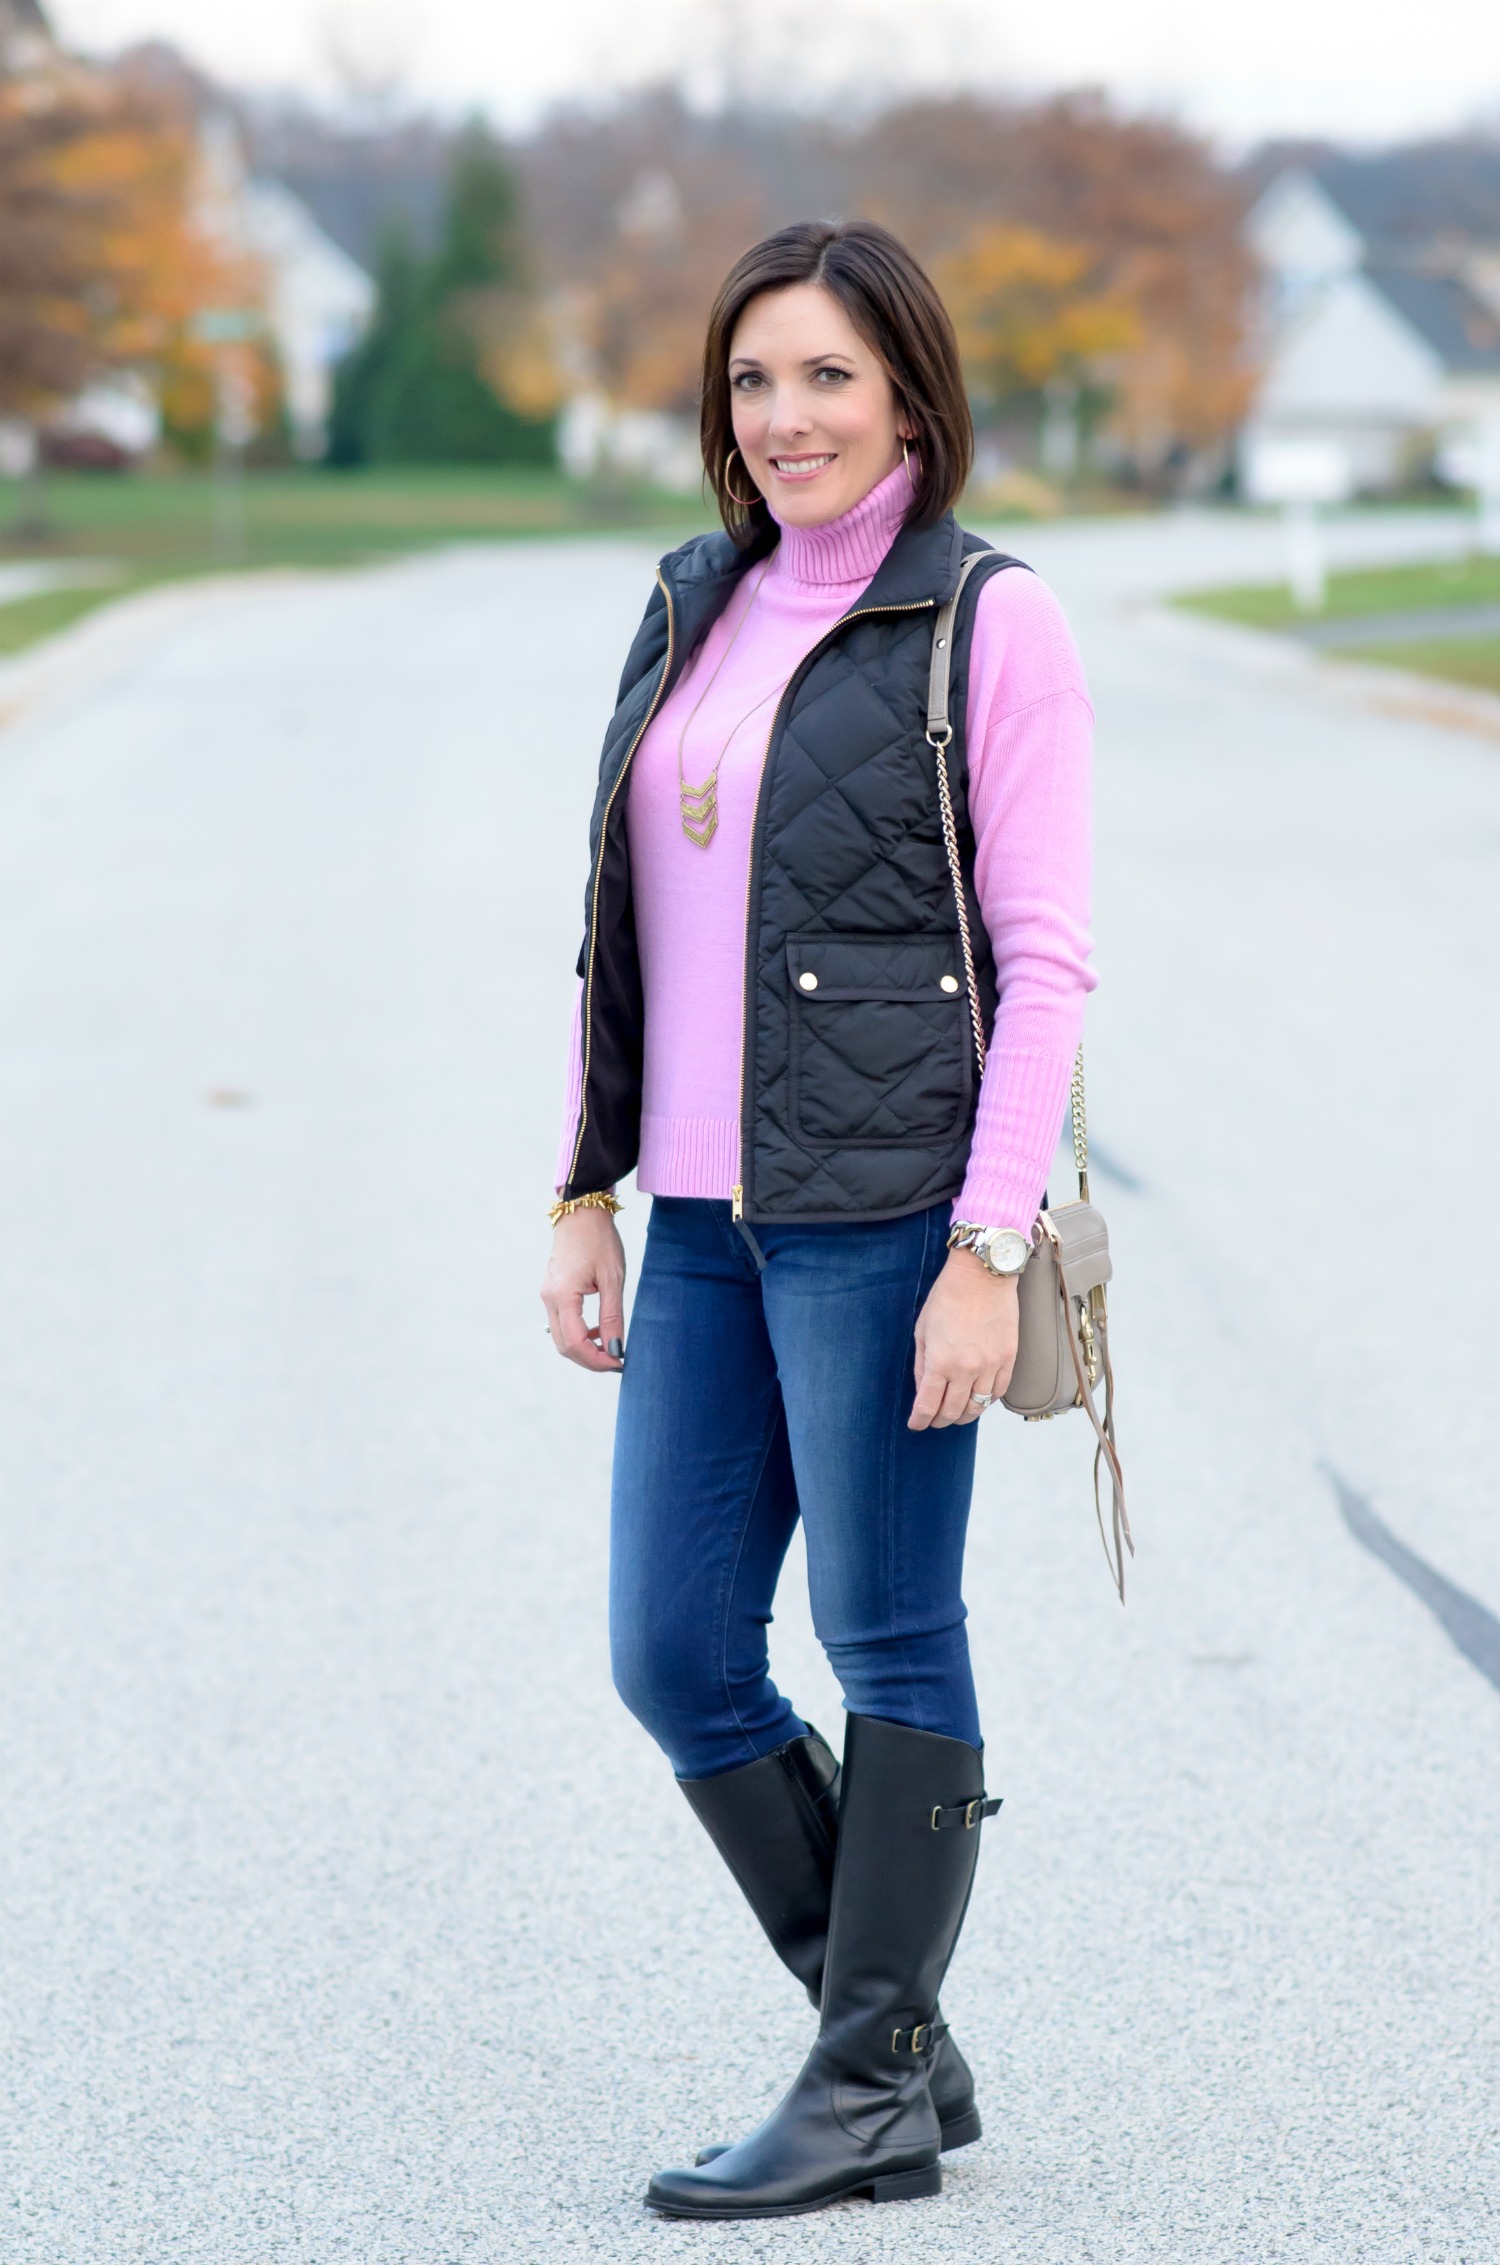 Casual Winter Outfit Ideas: Black Quilted Vest with Pink Wool Turtleneck, Skinny Jeans, and Black Riding Boots